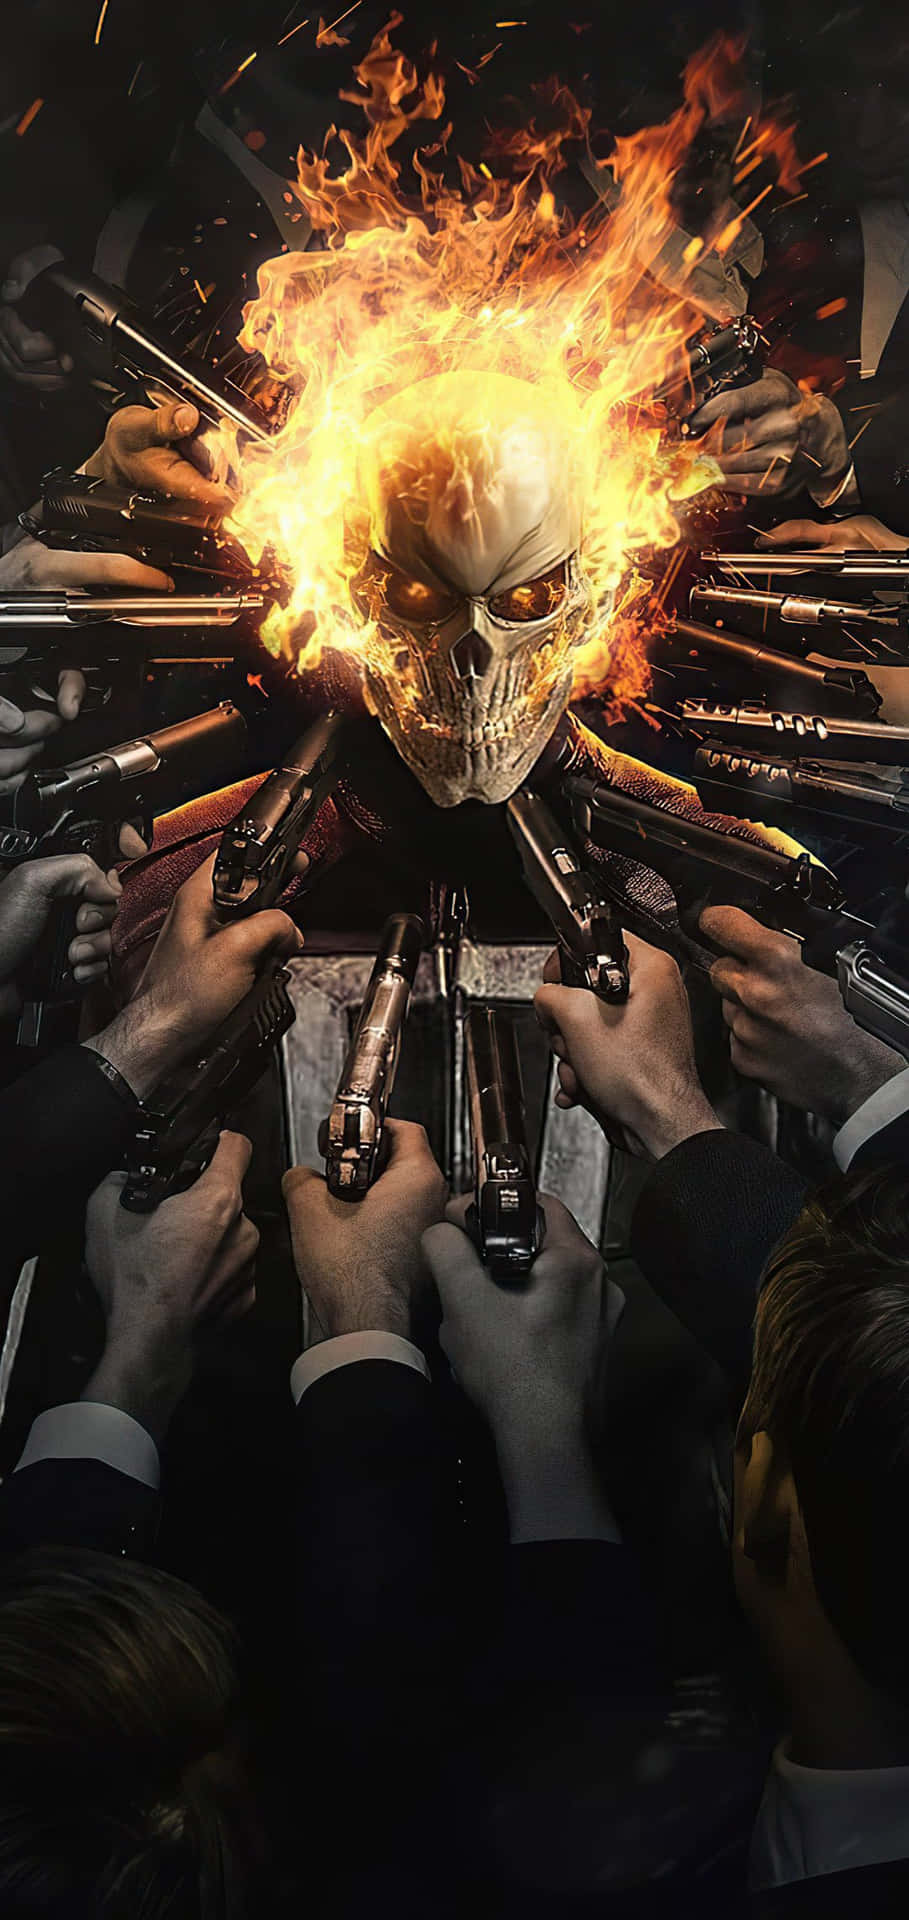 The Spirit of Vengeance is unleashed in the form of Ghost Rider"